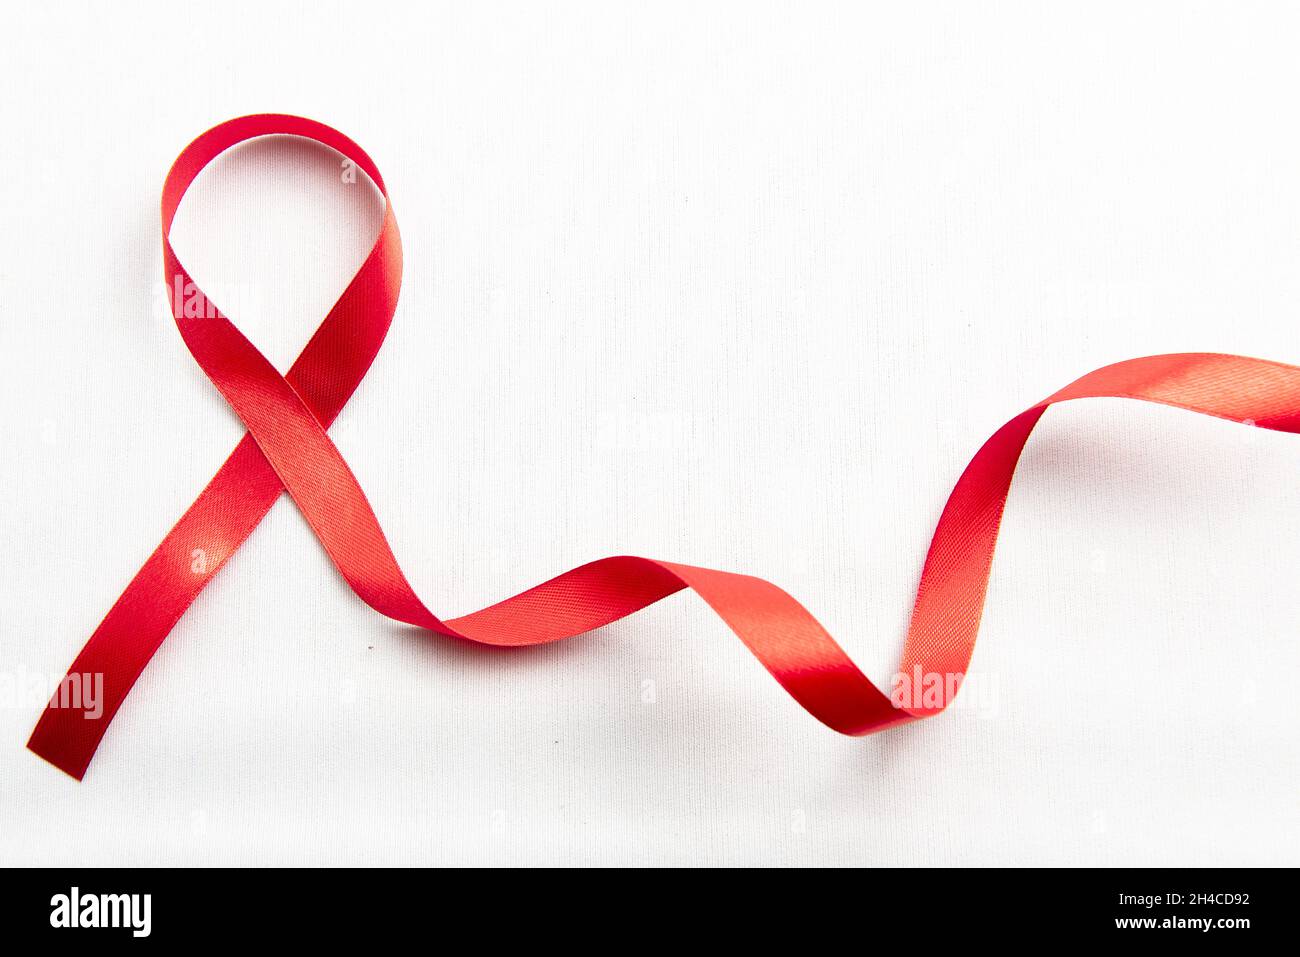 Red Support Ribbon isolated on white background. World aids day